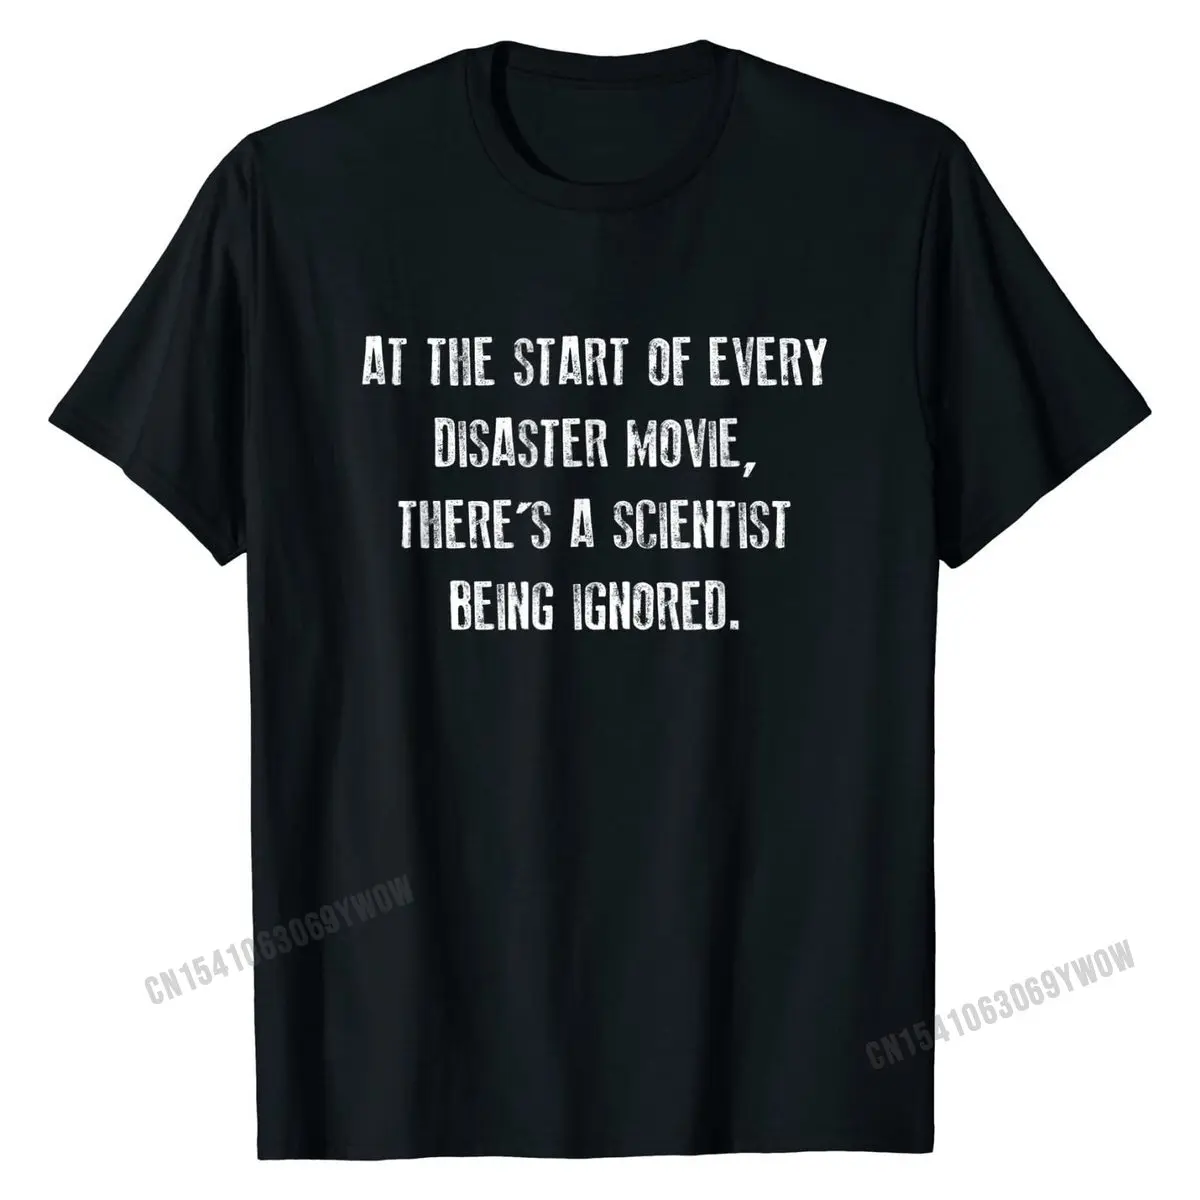 

Disaster Movie Scientist Ignored Shirt, Funny Science Gift Top T-shirts Coupons Printed Cotton Men Tees Summer